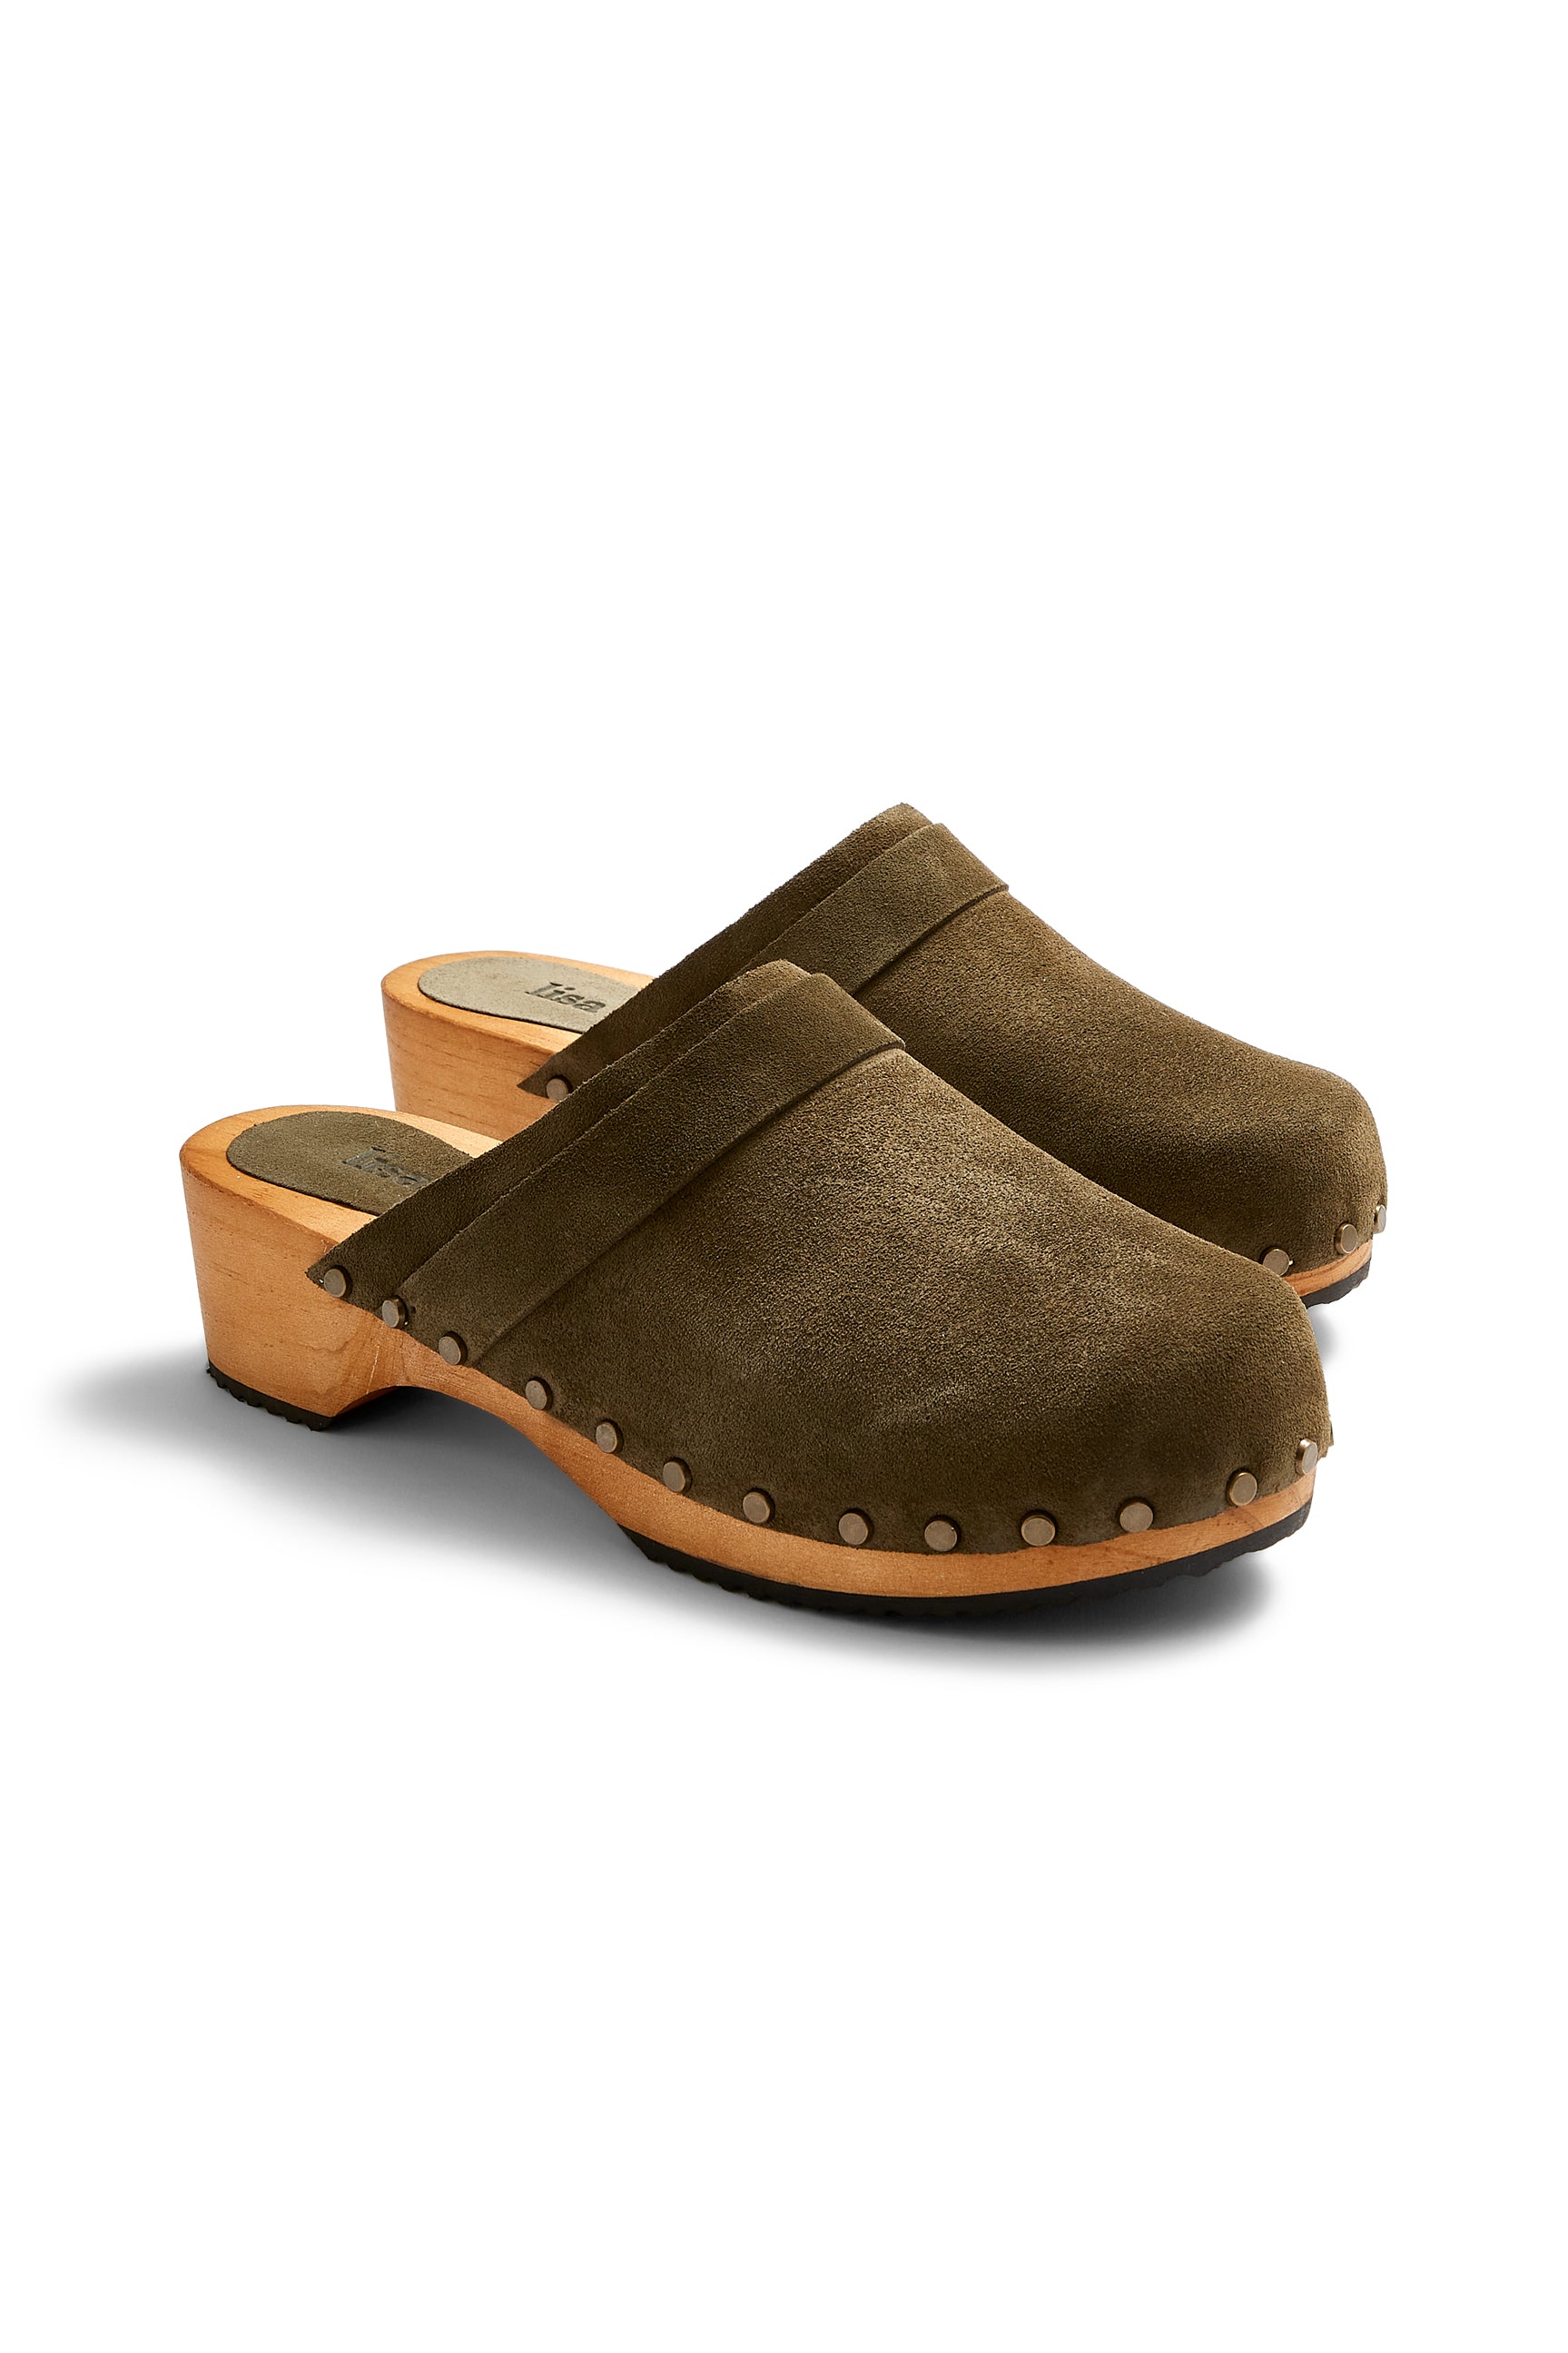 low heel classic clogs in olive suede - lisa b. olive suede 36 (US 5.5-6)